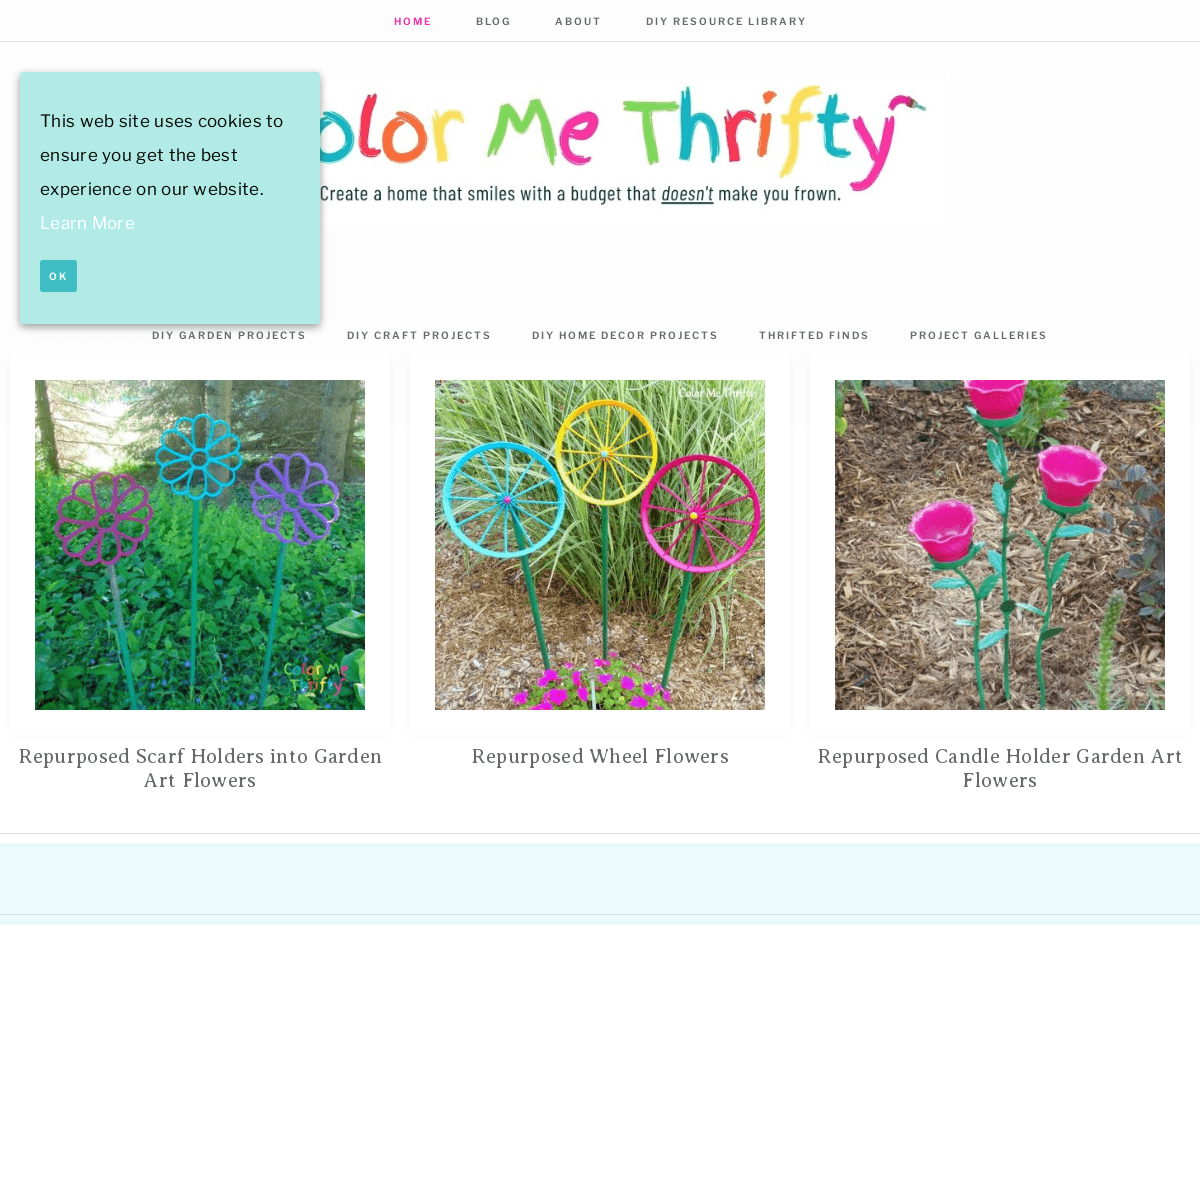 A complete backup of https://colormethrifty.com